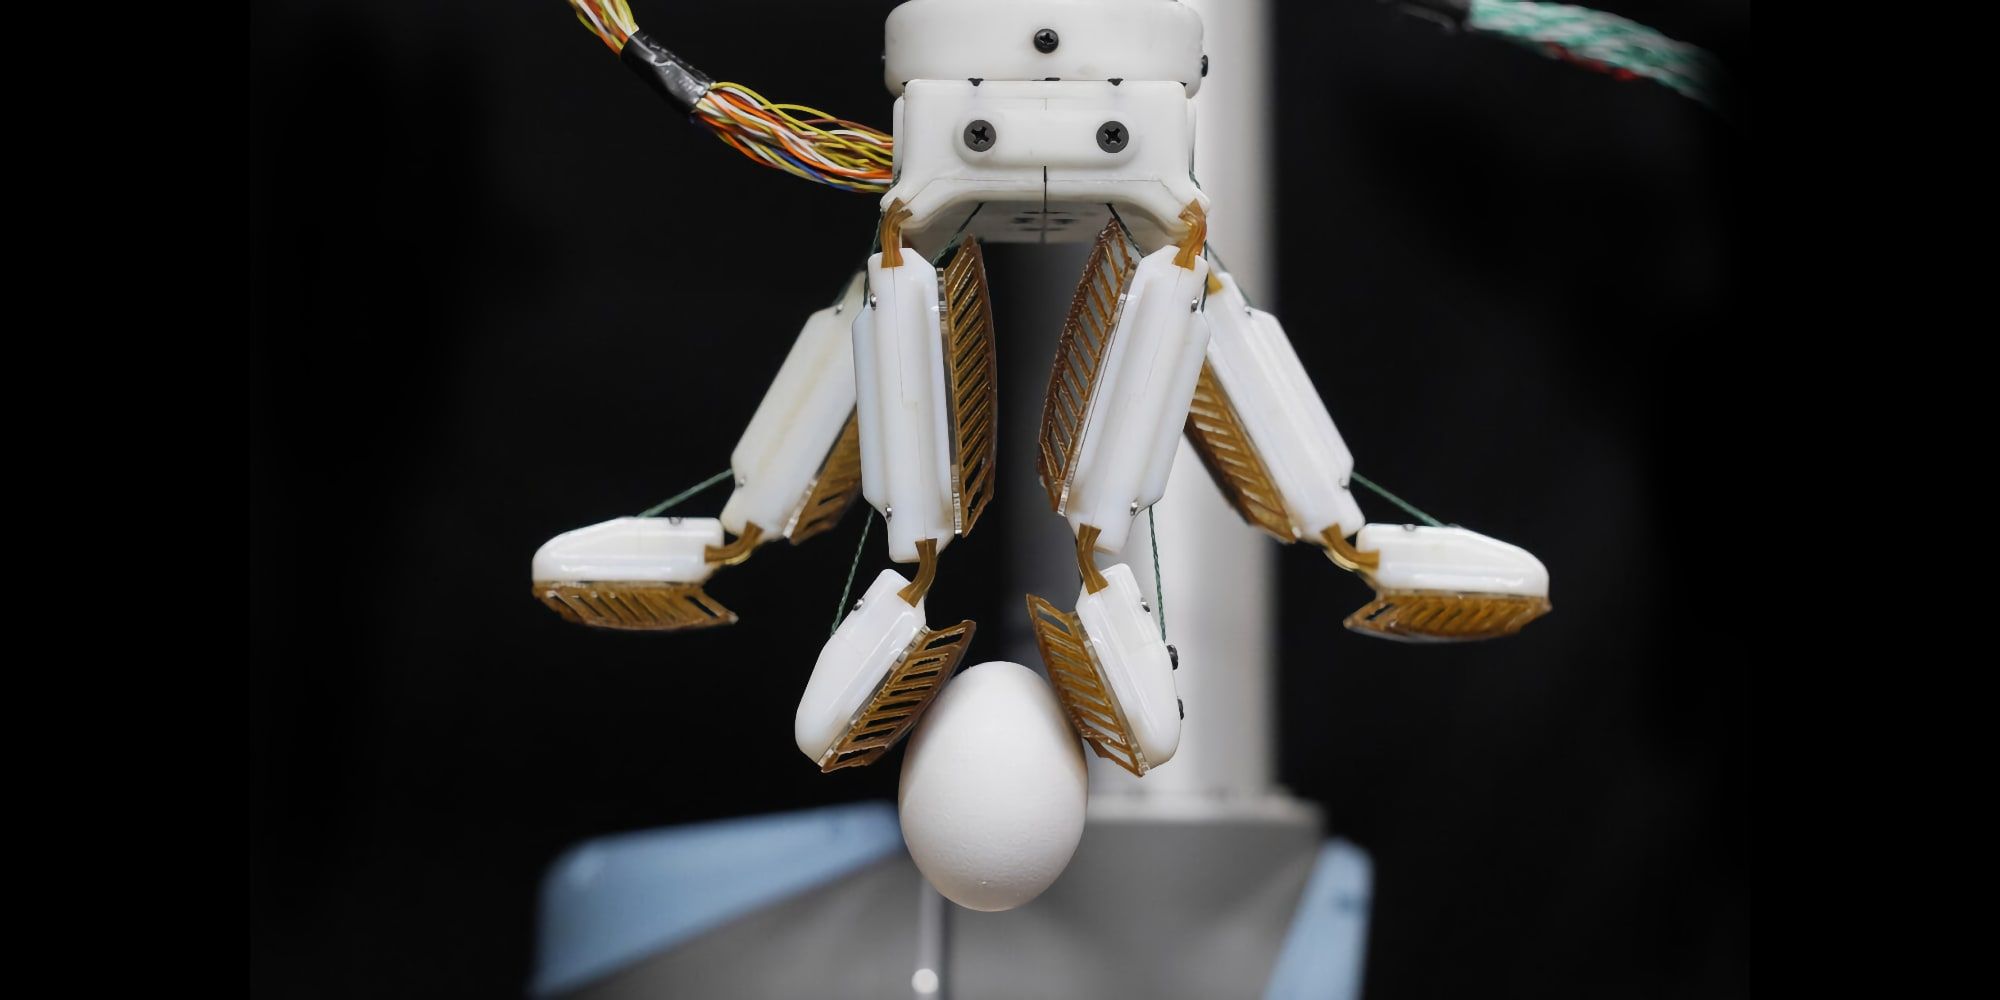 Watch This Gecko-Inspired Robot Hand Grip And Pick Items Up